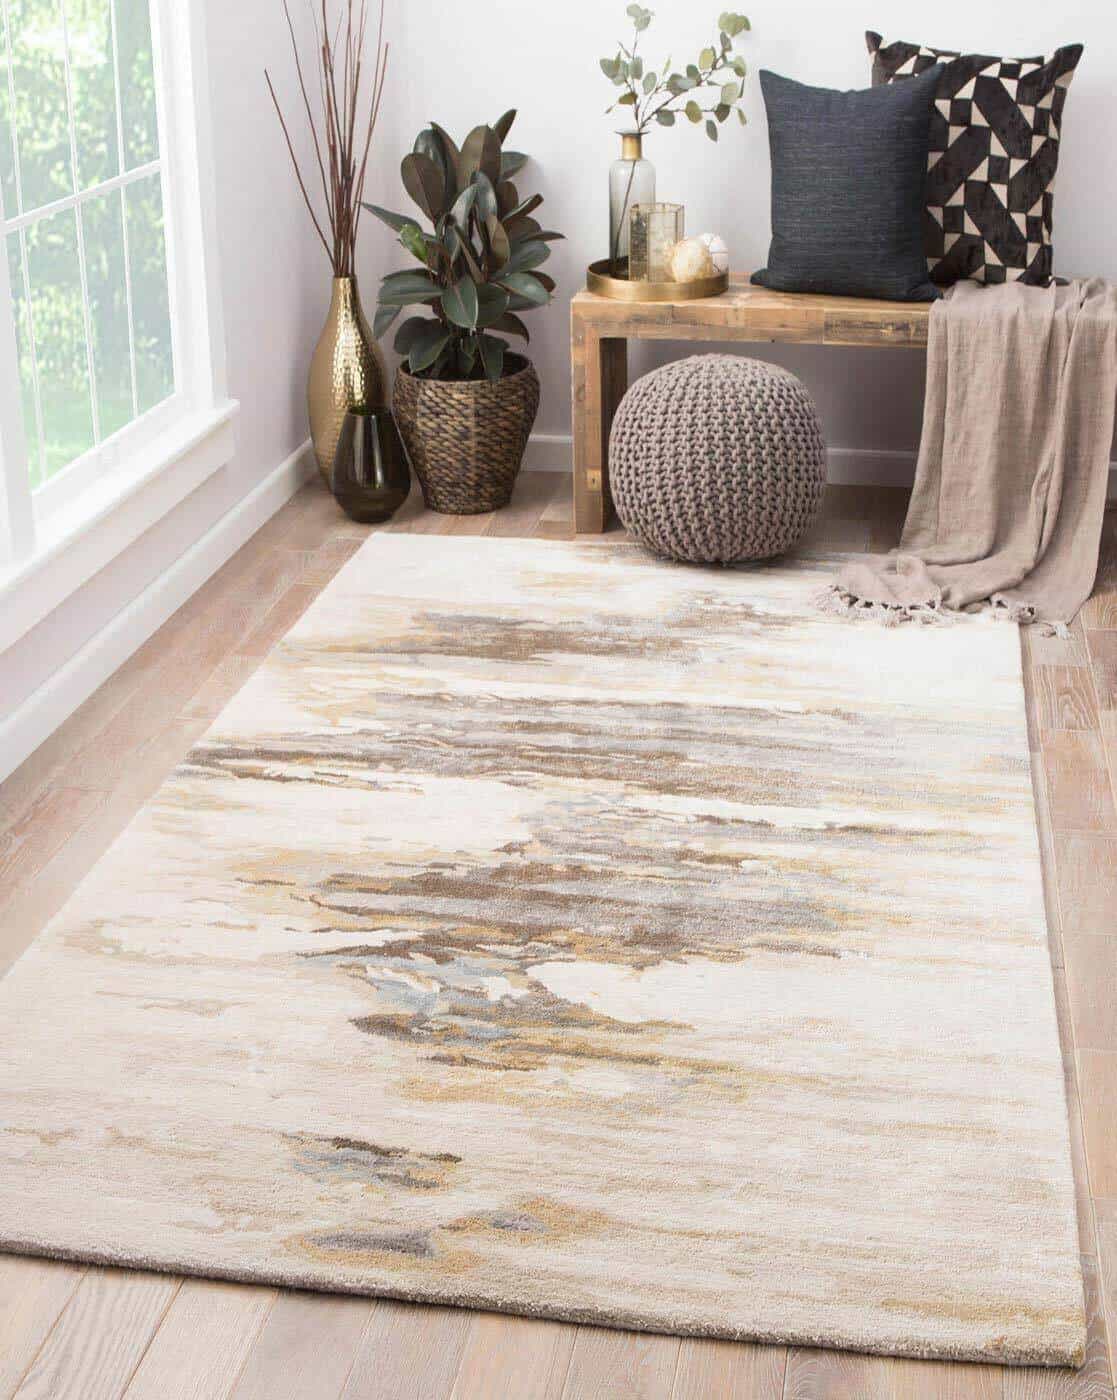 beige hand tufted rug with wooden furniture